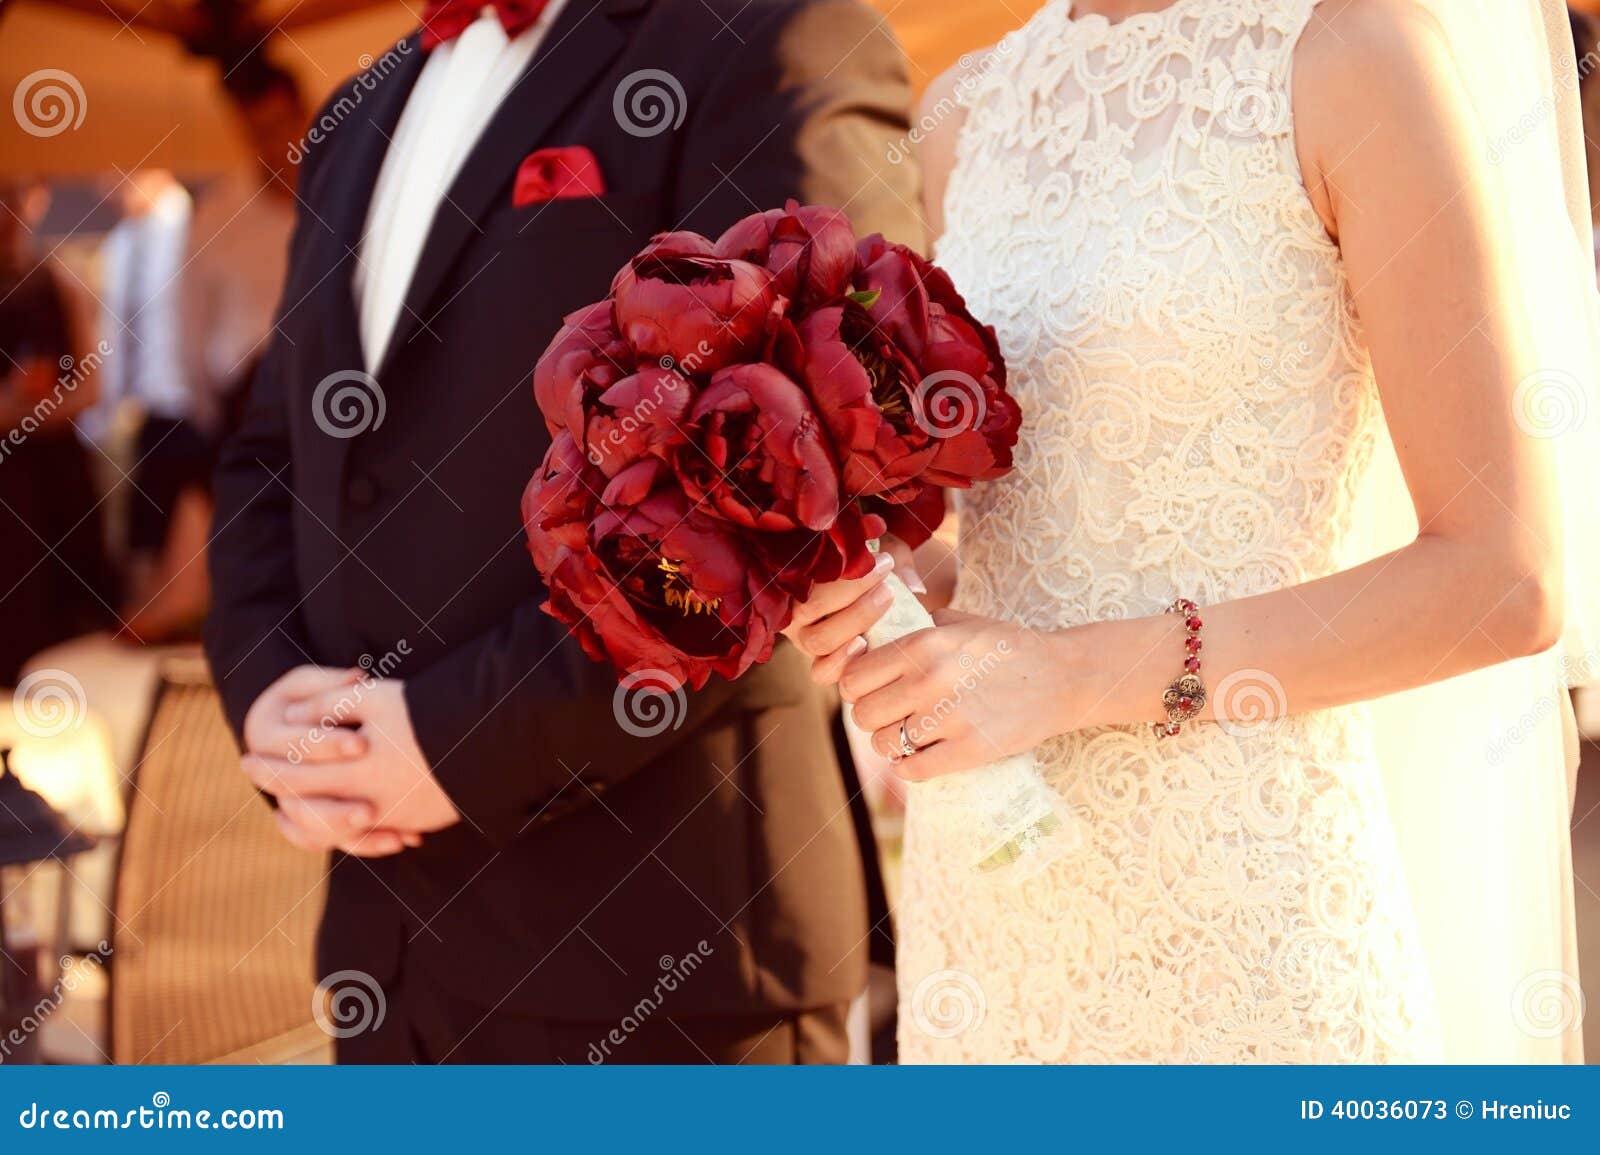 Beautiful bride and groom holding red flowers bouquet in hands